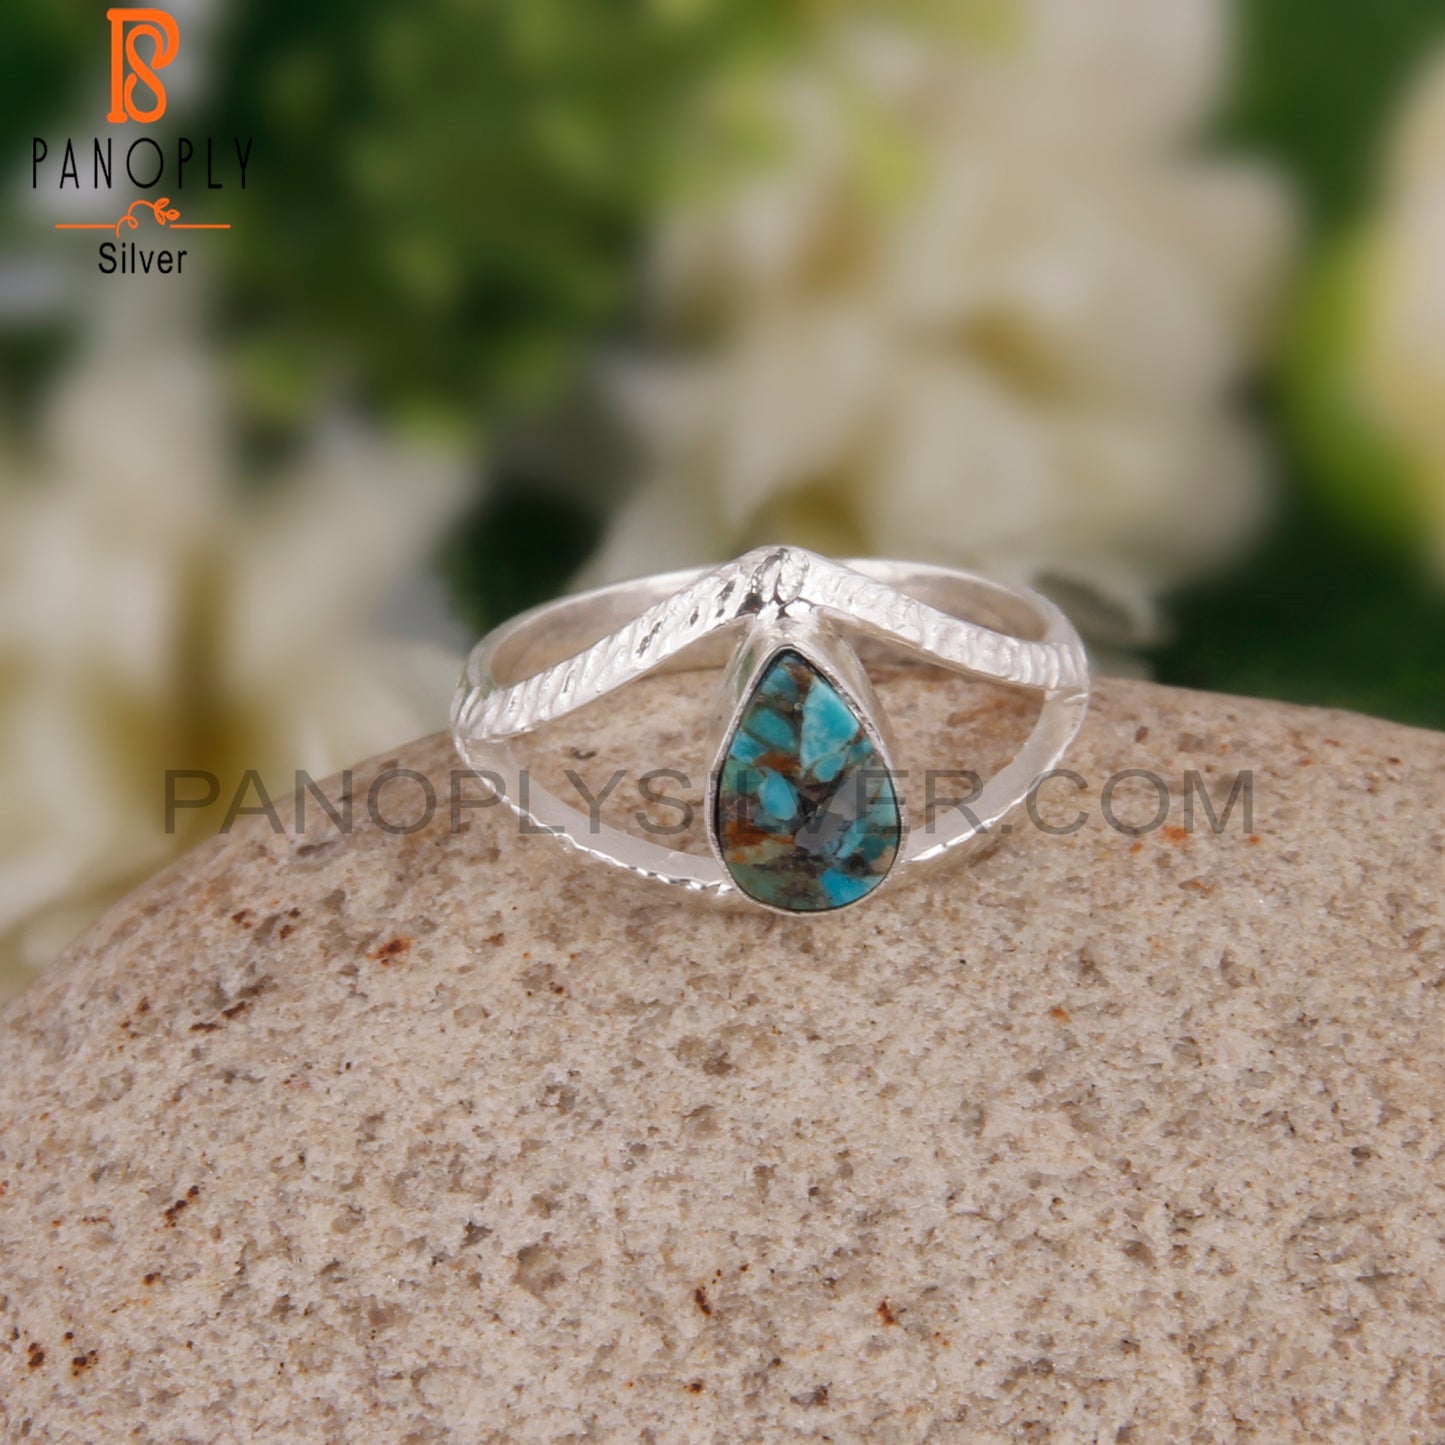 Boulder Turquoise Stylish Pear 925 Silver Classic Ring